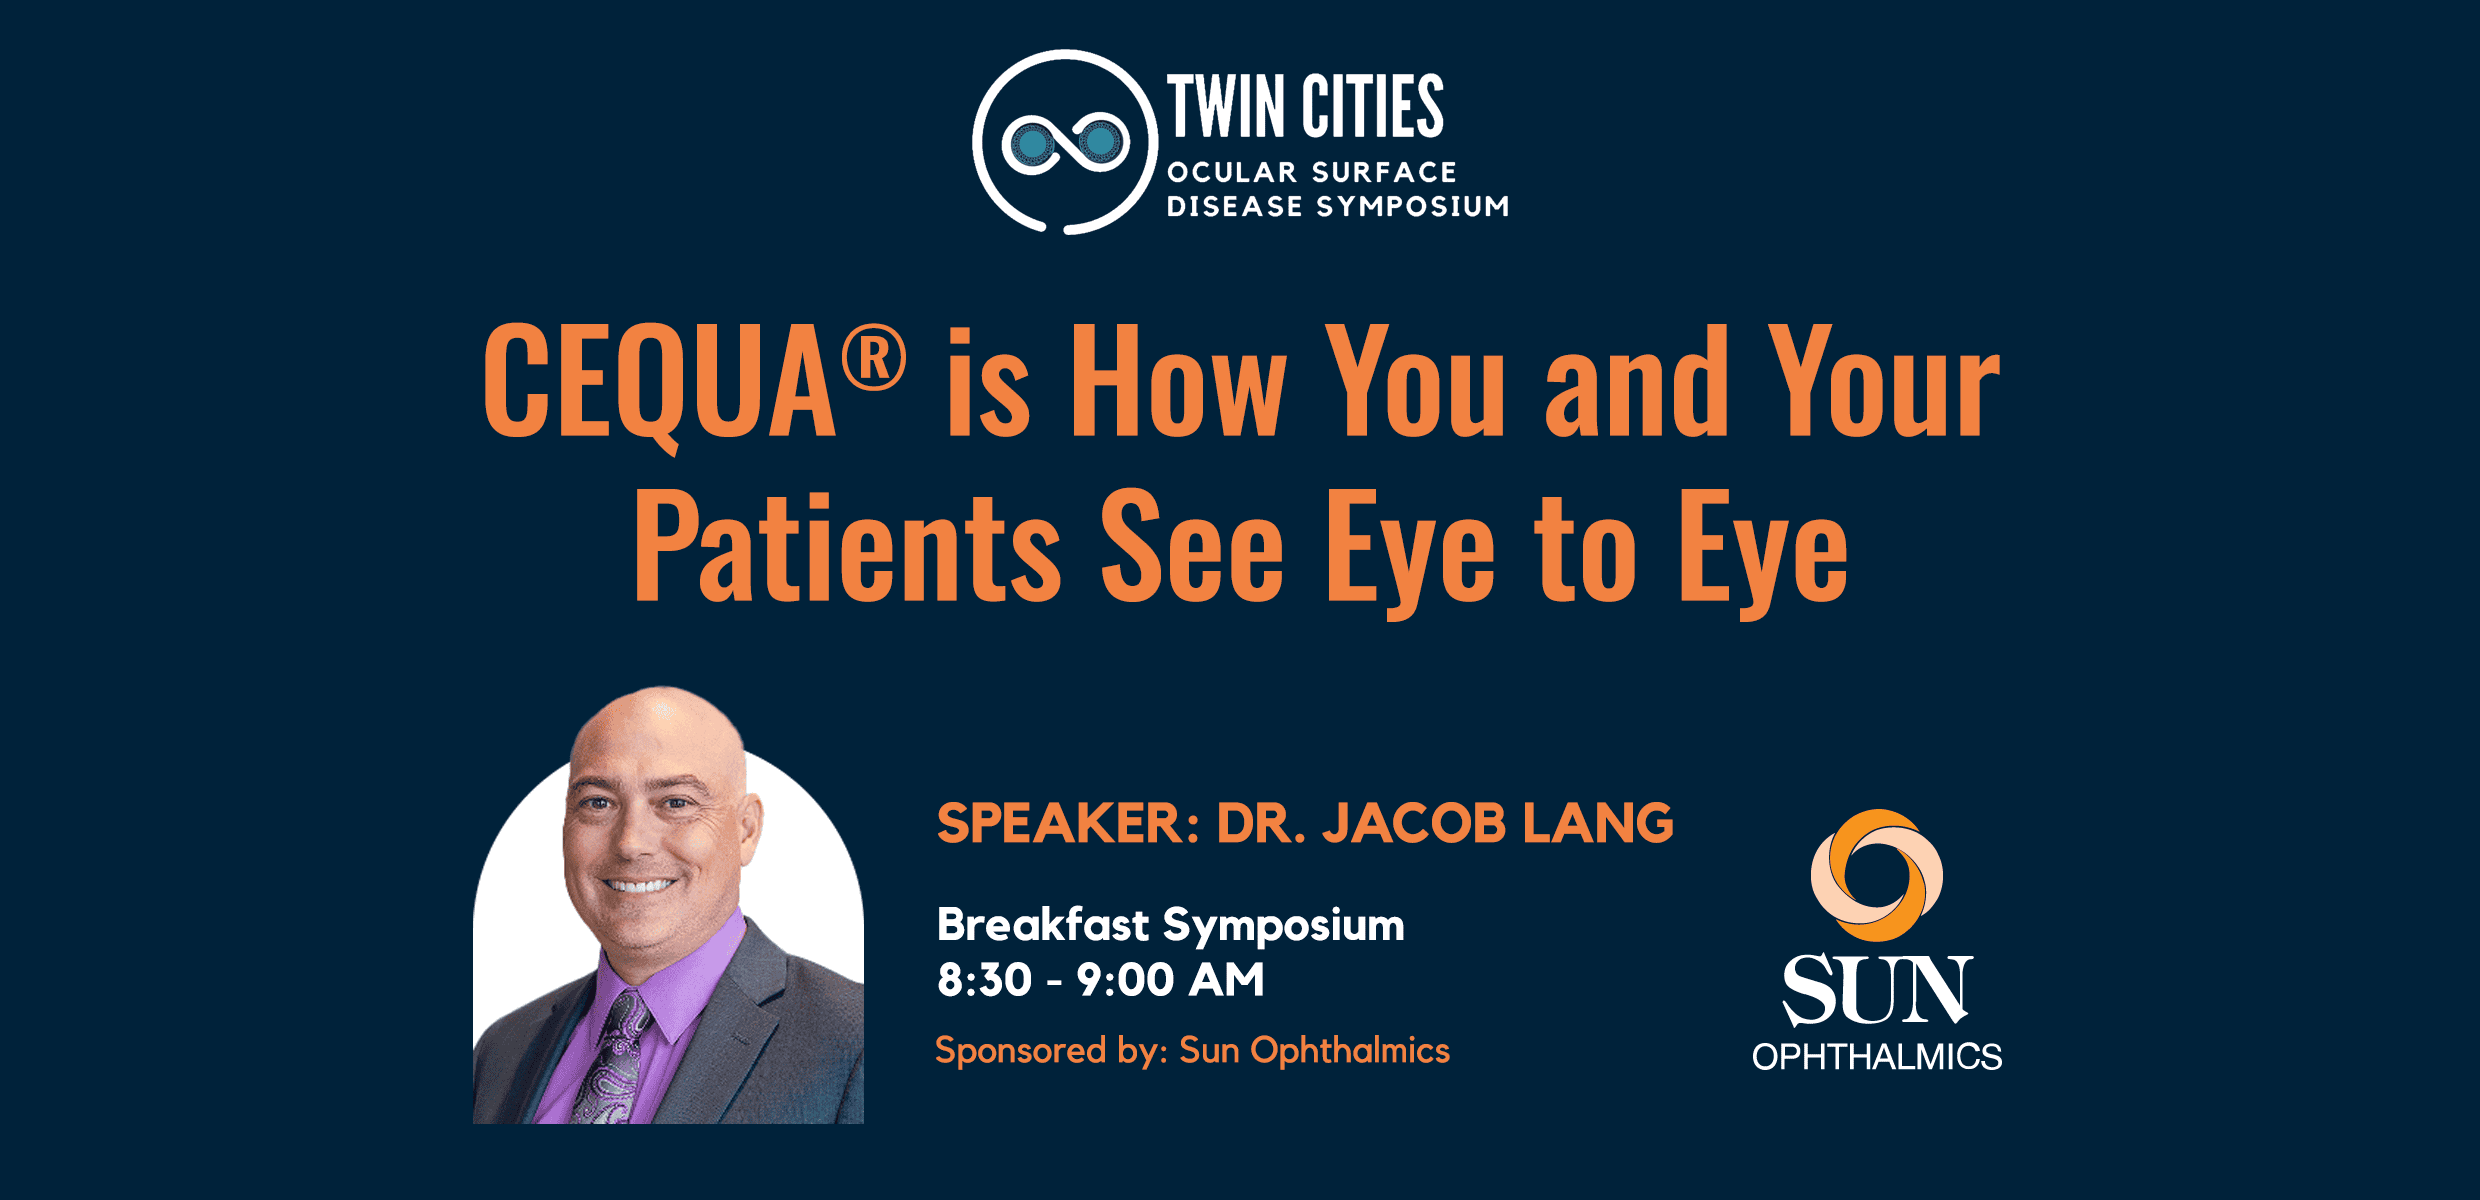 Twin Cities Sun Ophthalmic’s Sponsored Symposium